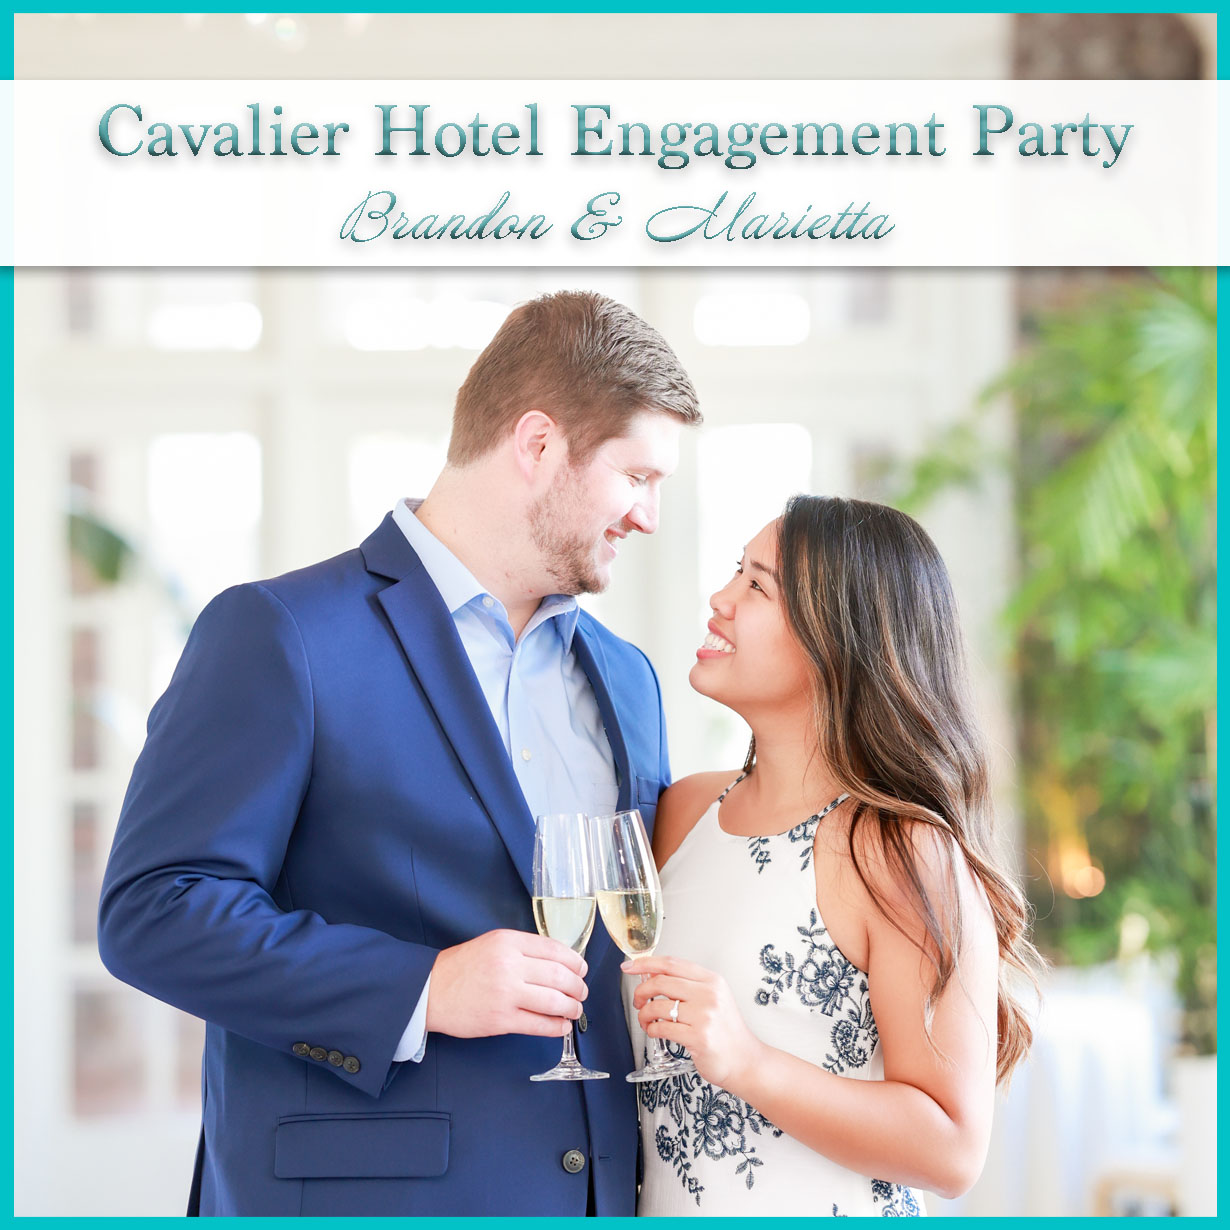 Cavalier Hotel Engagement Party